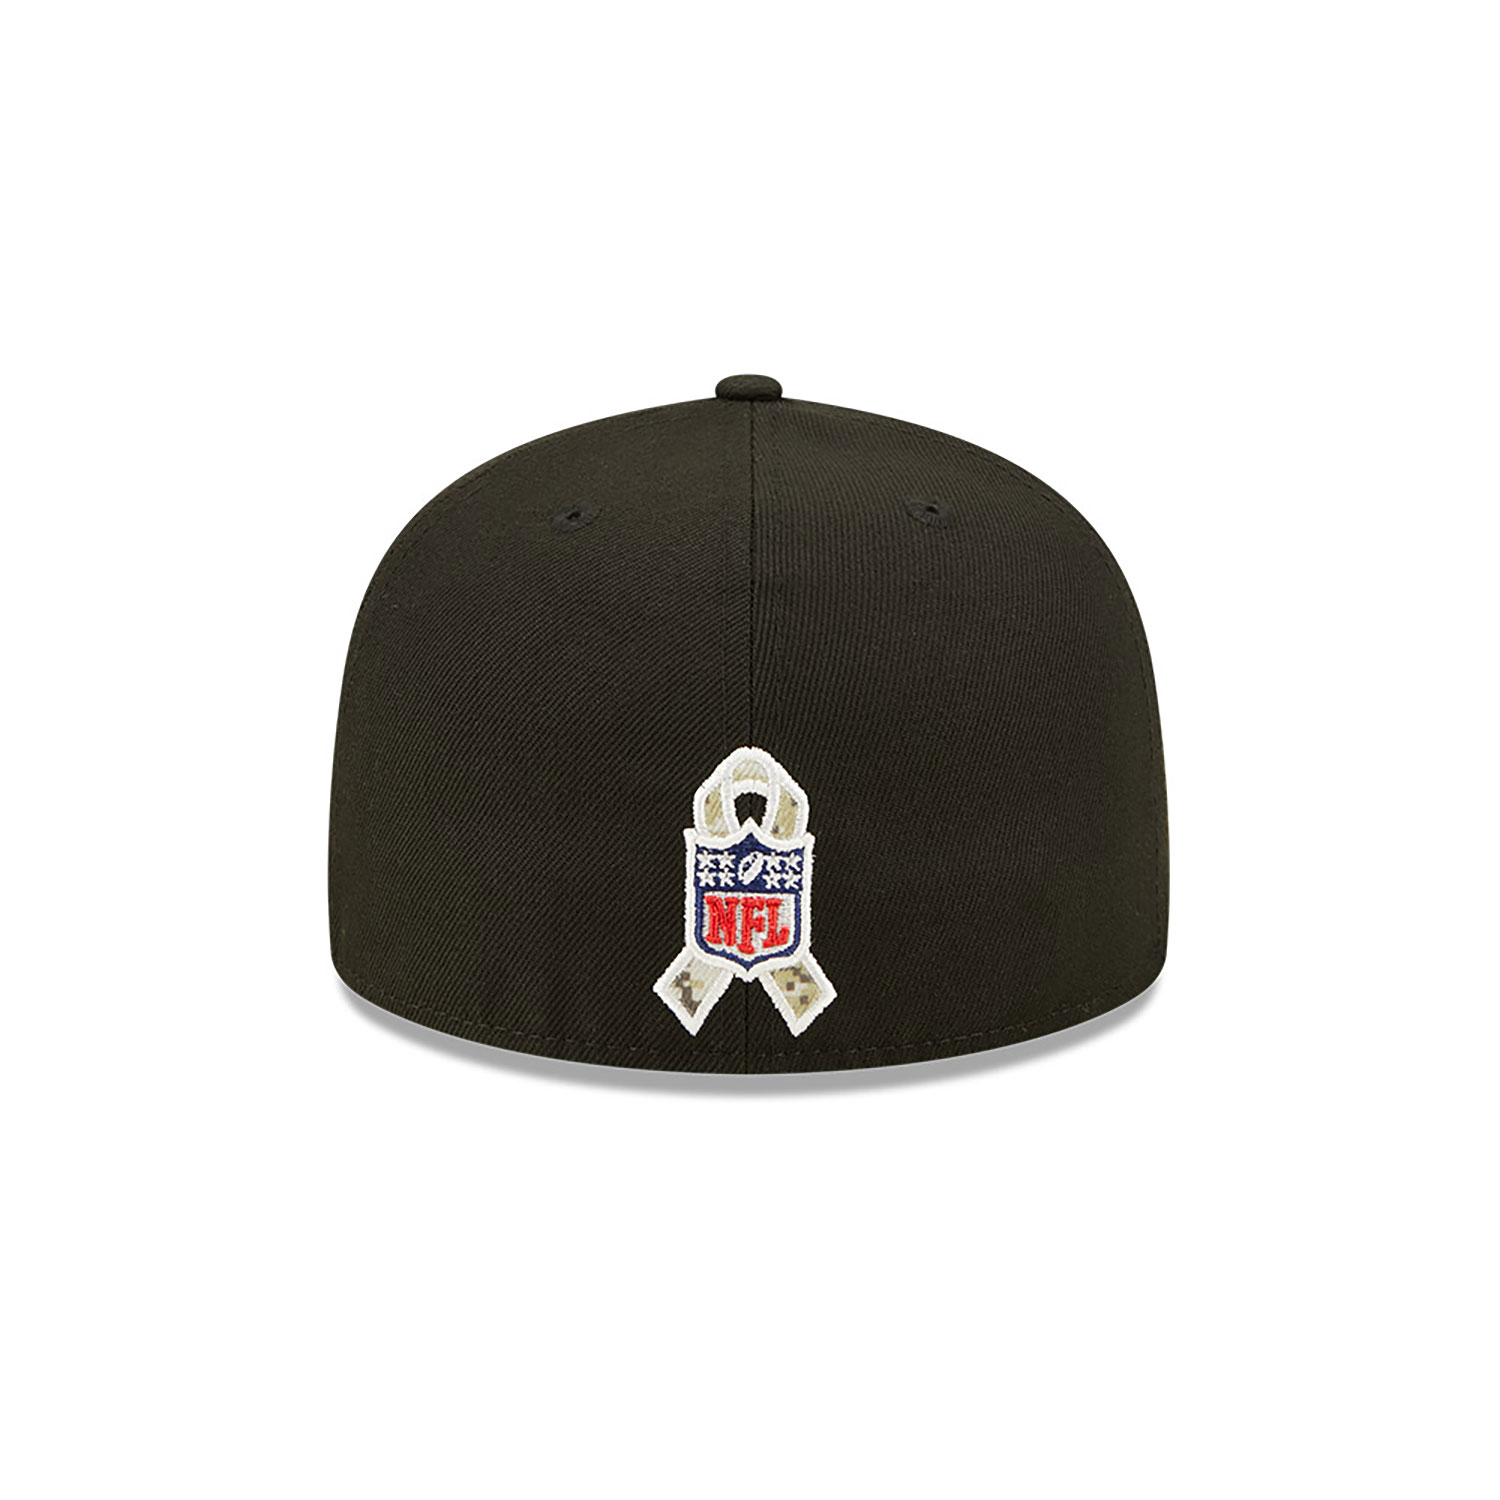 Philadelphia Eagles NFL Salute to Service Black 59FIFTY Fitted Cap